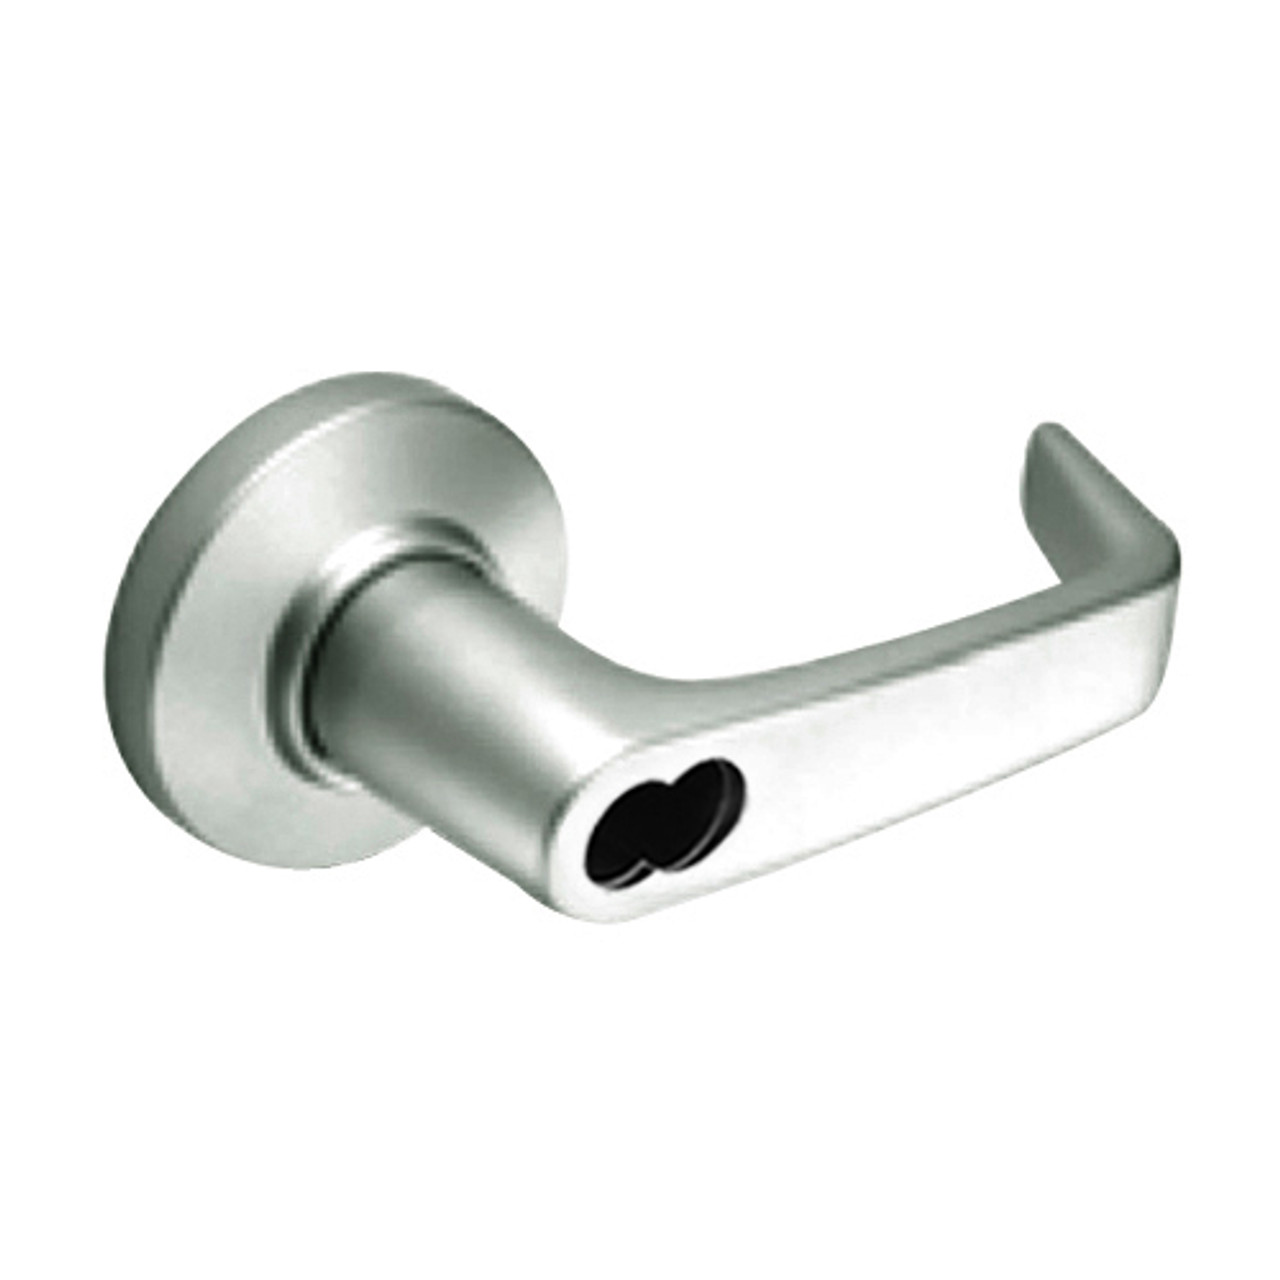 9K37DR15CSTK619 Best 9K Series Special Function Cylindrical Lever Locks with Contour Angle with Return Lever Design Accept 7 Pin Best Core in Satin Nickel